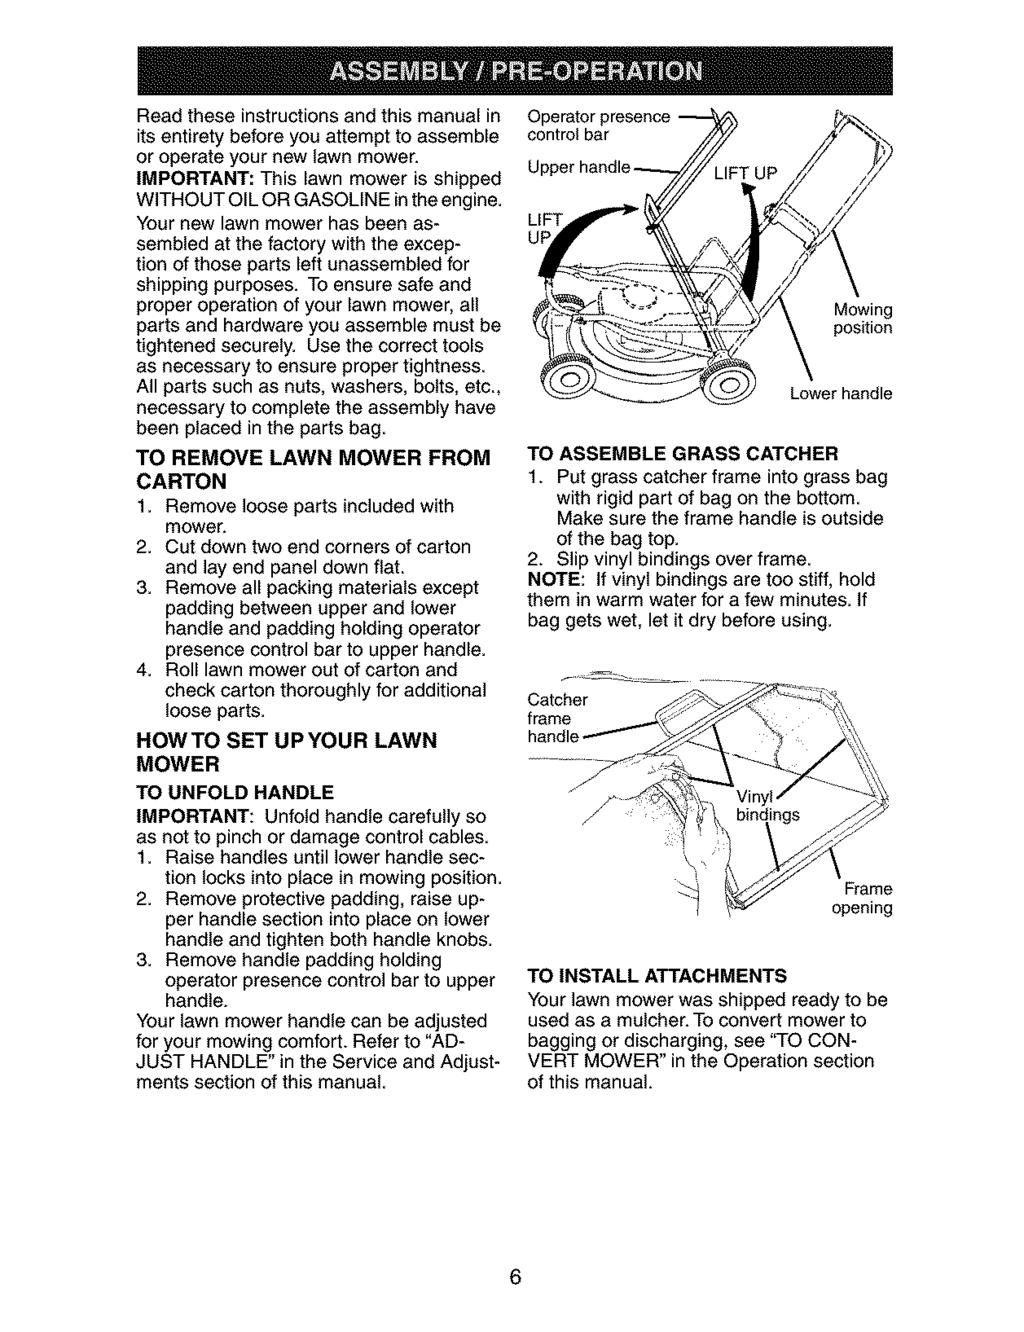 Read these instructions and this manual in its entirety before you attempt to assemble or operate your new lawn mower. IMPORTANT: This lawn mower is shipped WITHOUT OIL OR GASOLINE in the engine.